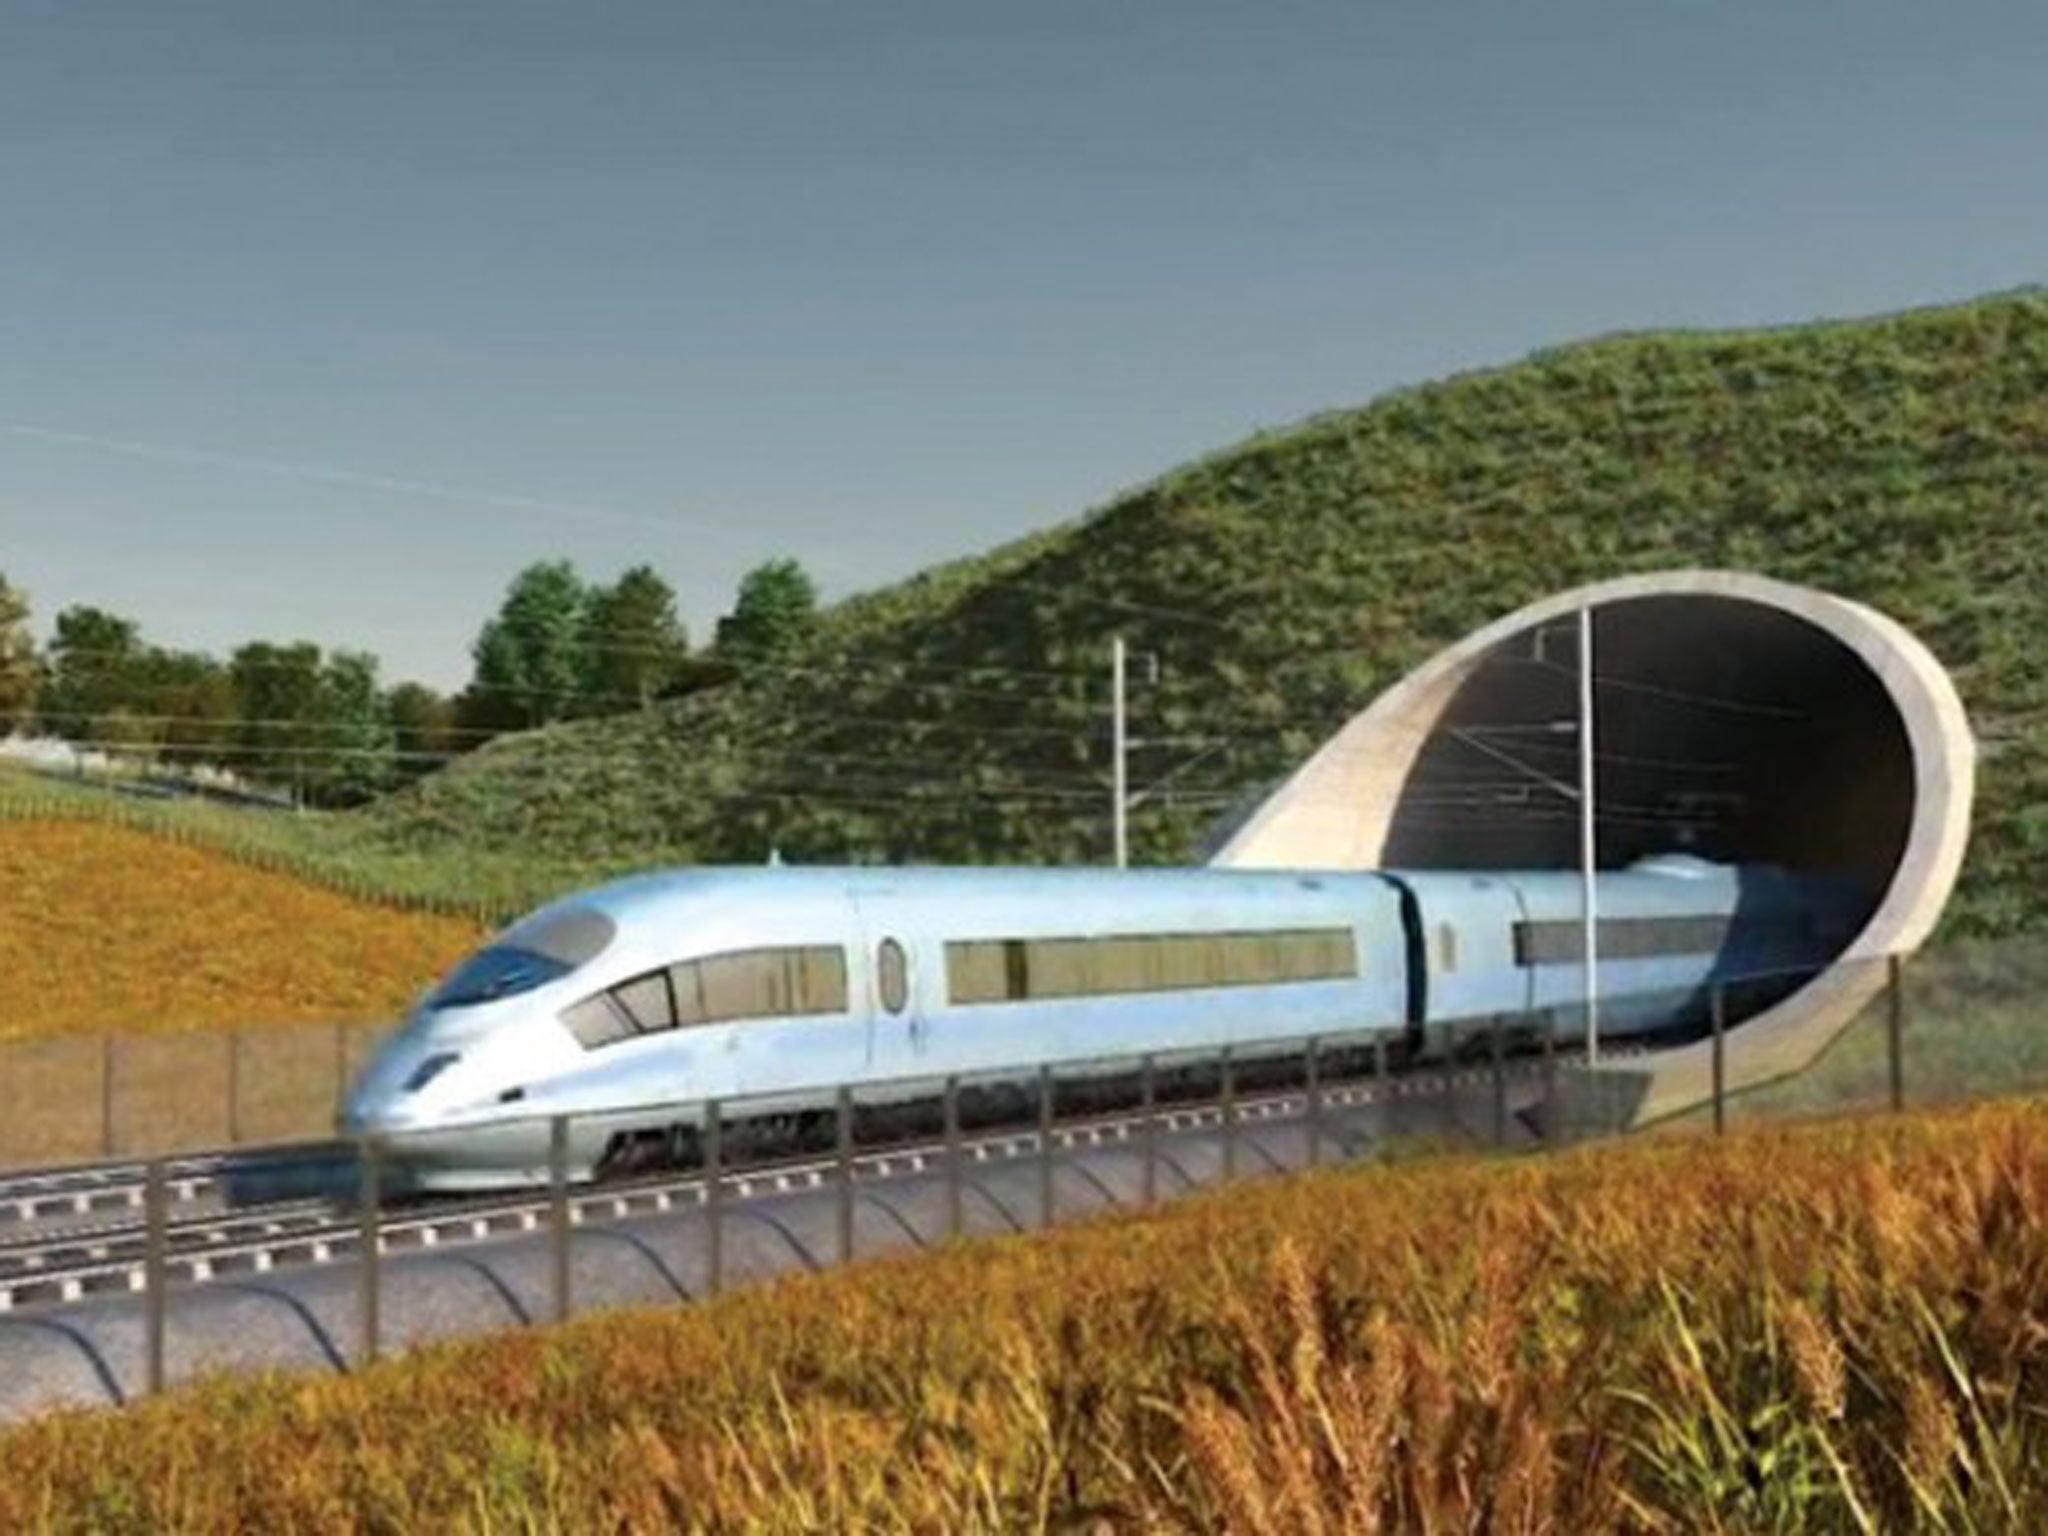 The HS2 project has proved controversial